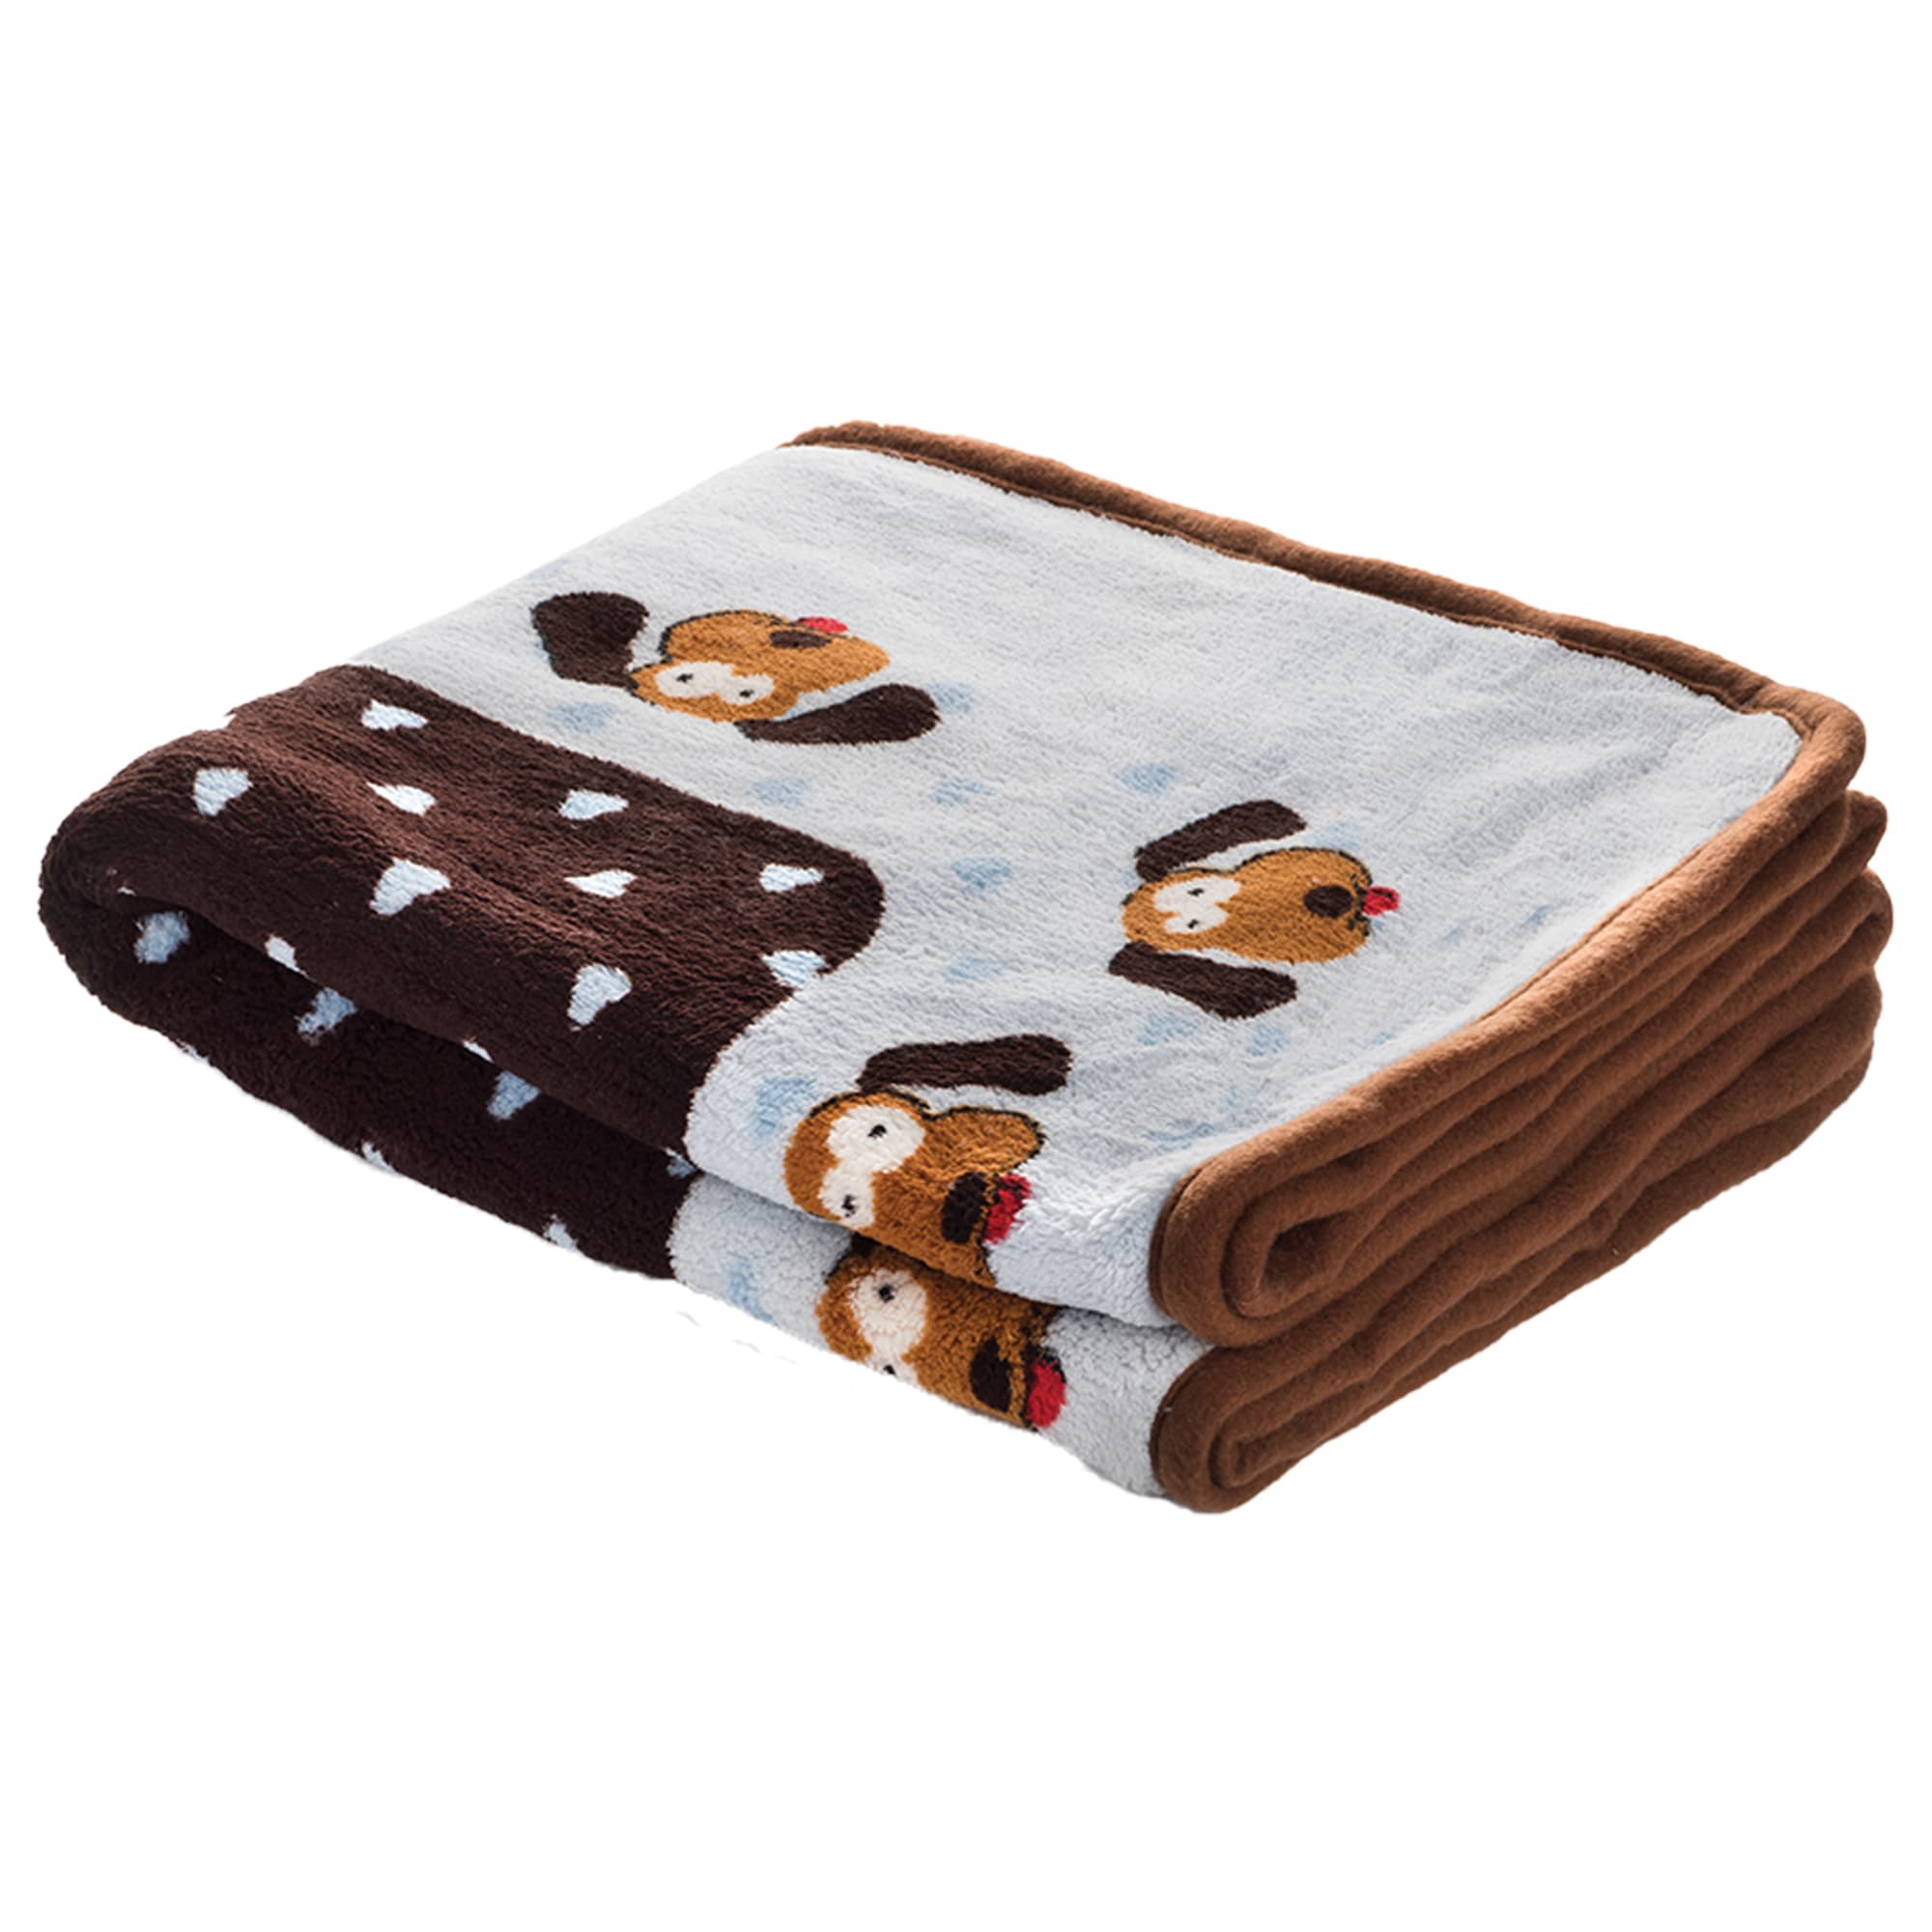 Snuggle Puppy Blue Snuggle Blanket For Pets, 12.25